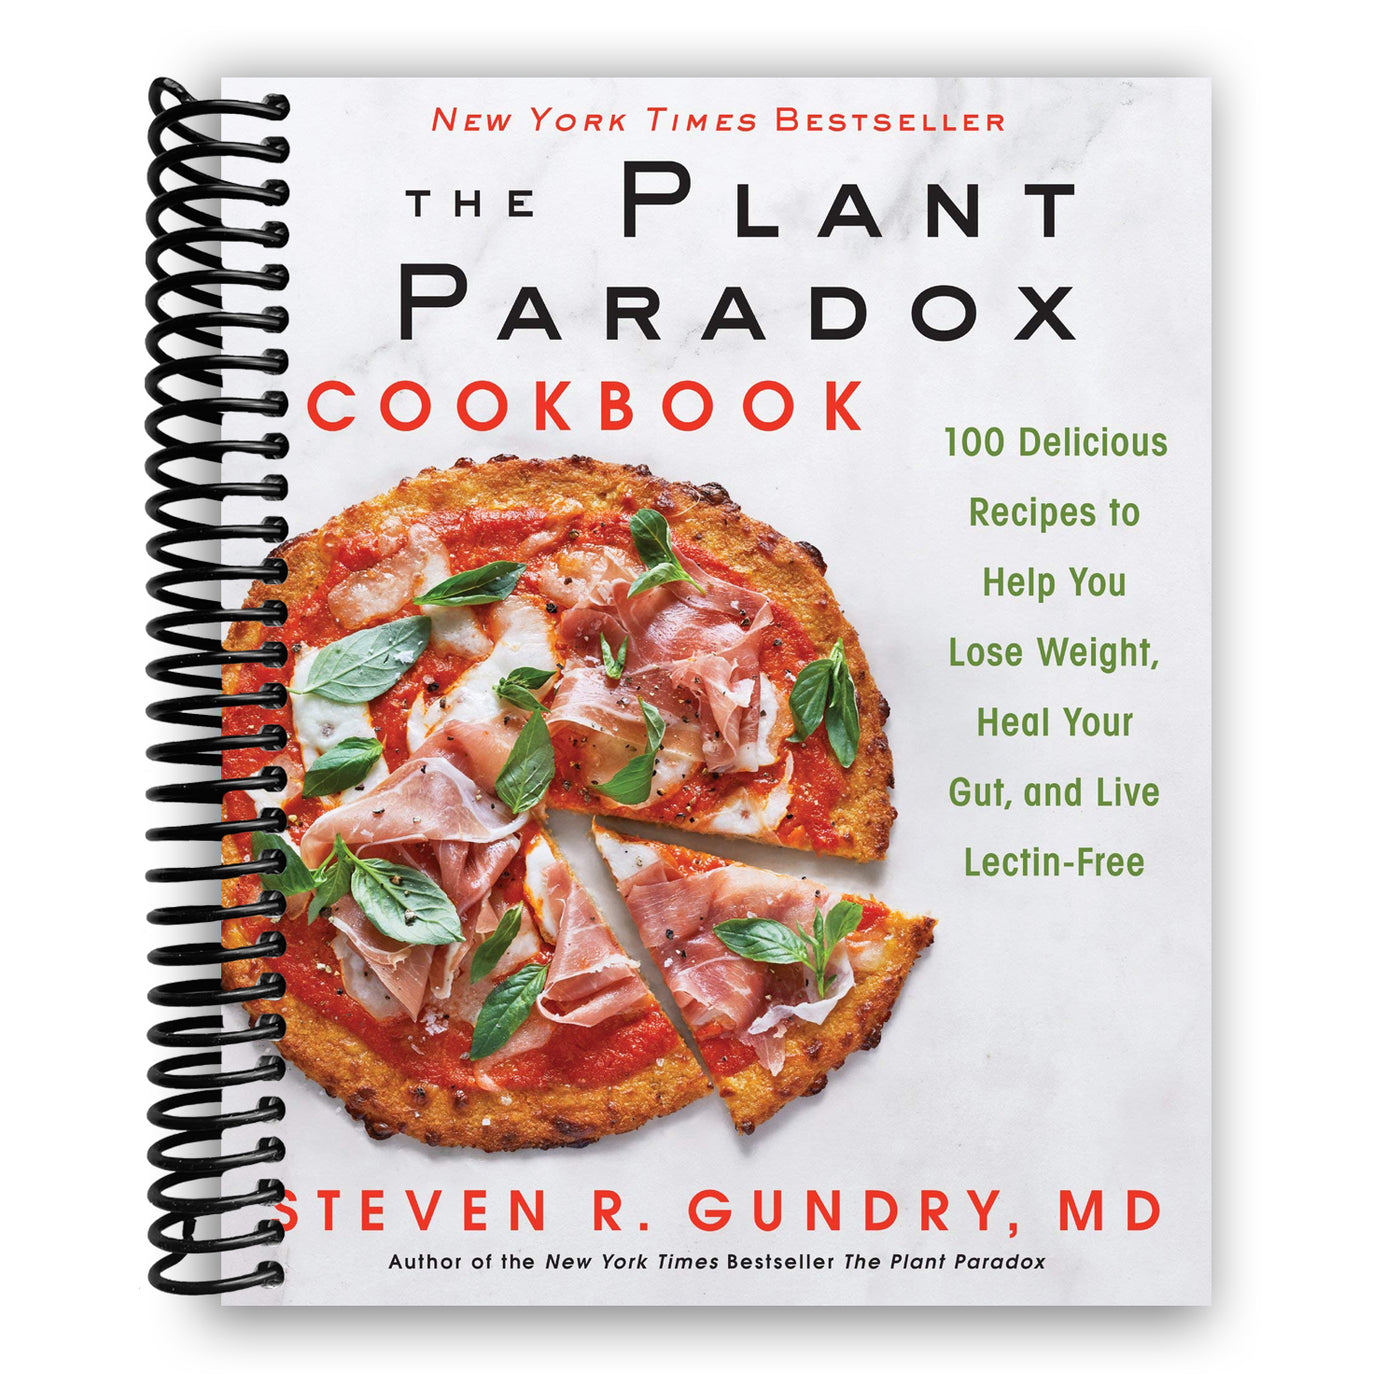 The Plant Paradox Cookbook: 100 Delicious Recipes to Help You Lose Weight, Heal Your Gut, and Live Lectin-Free (Spiral Bound)